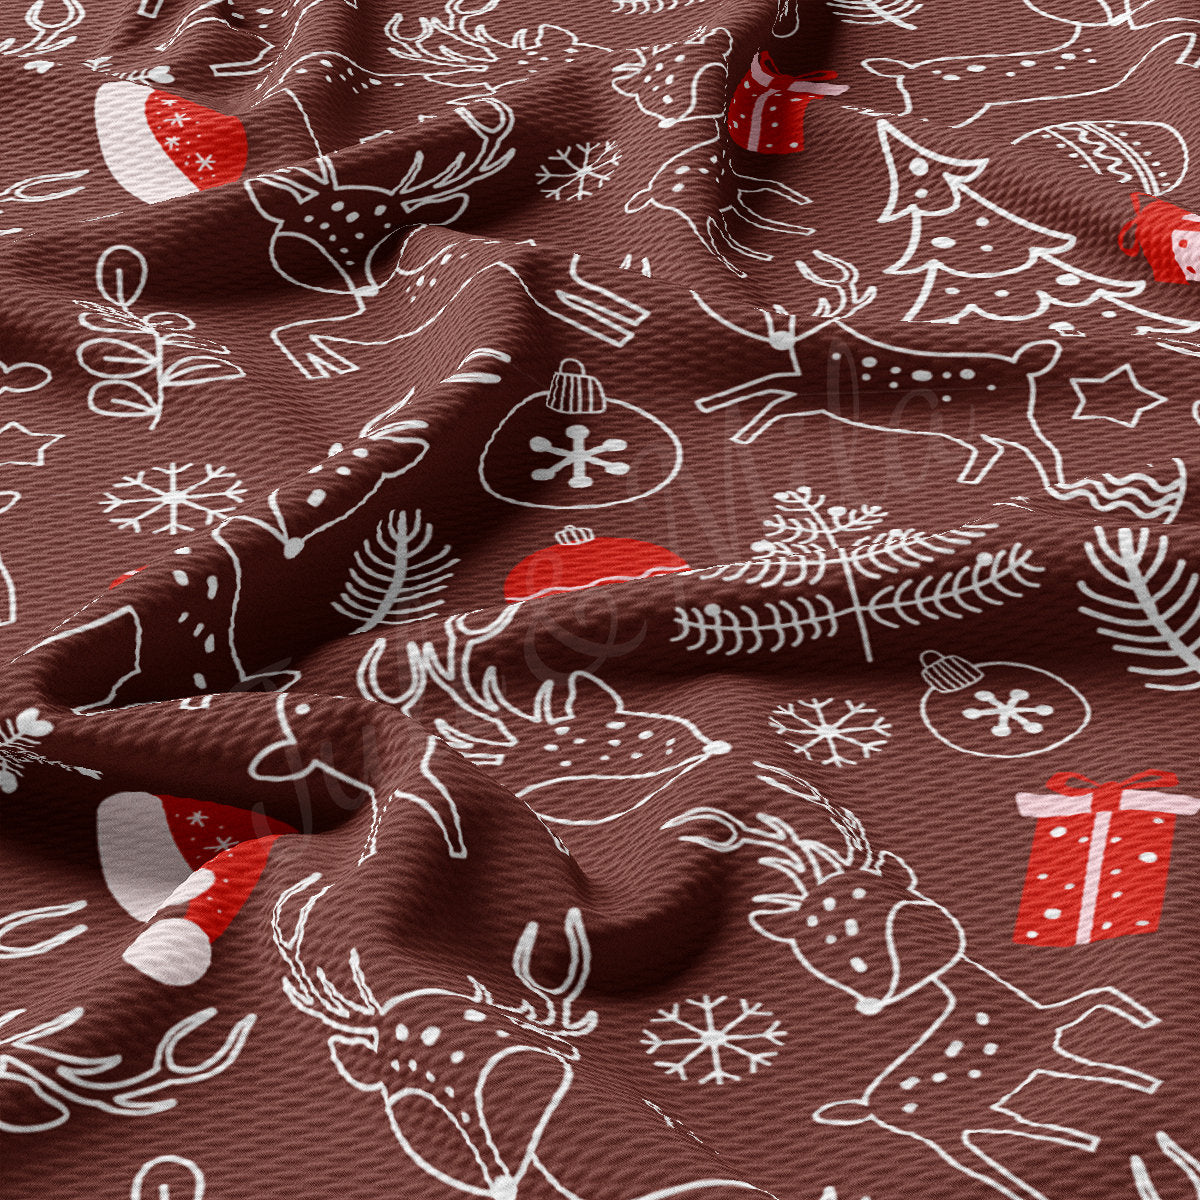 Christmas Printed Liverpool Bullet Textured Fabric by the yard 4Way Stretch Solid Strip Thick Knit Liverpool Fabric AA2164